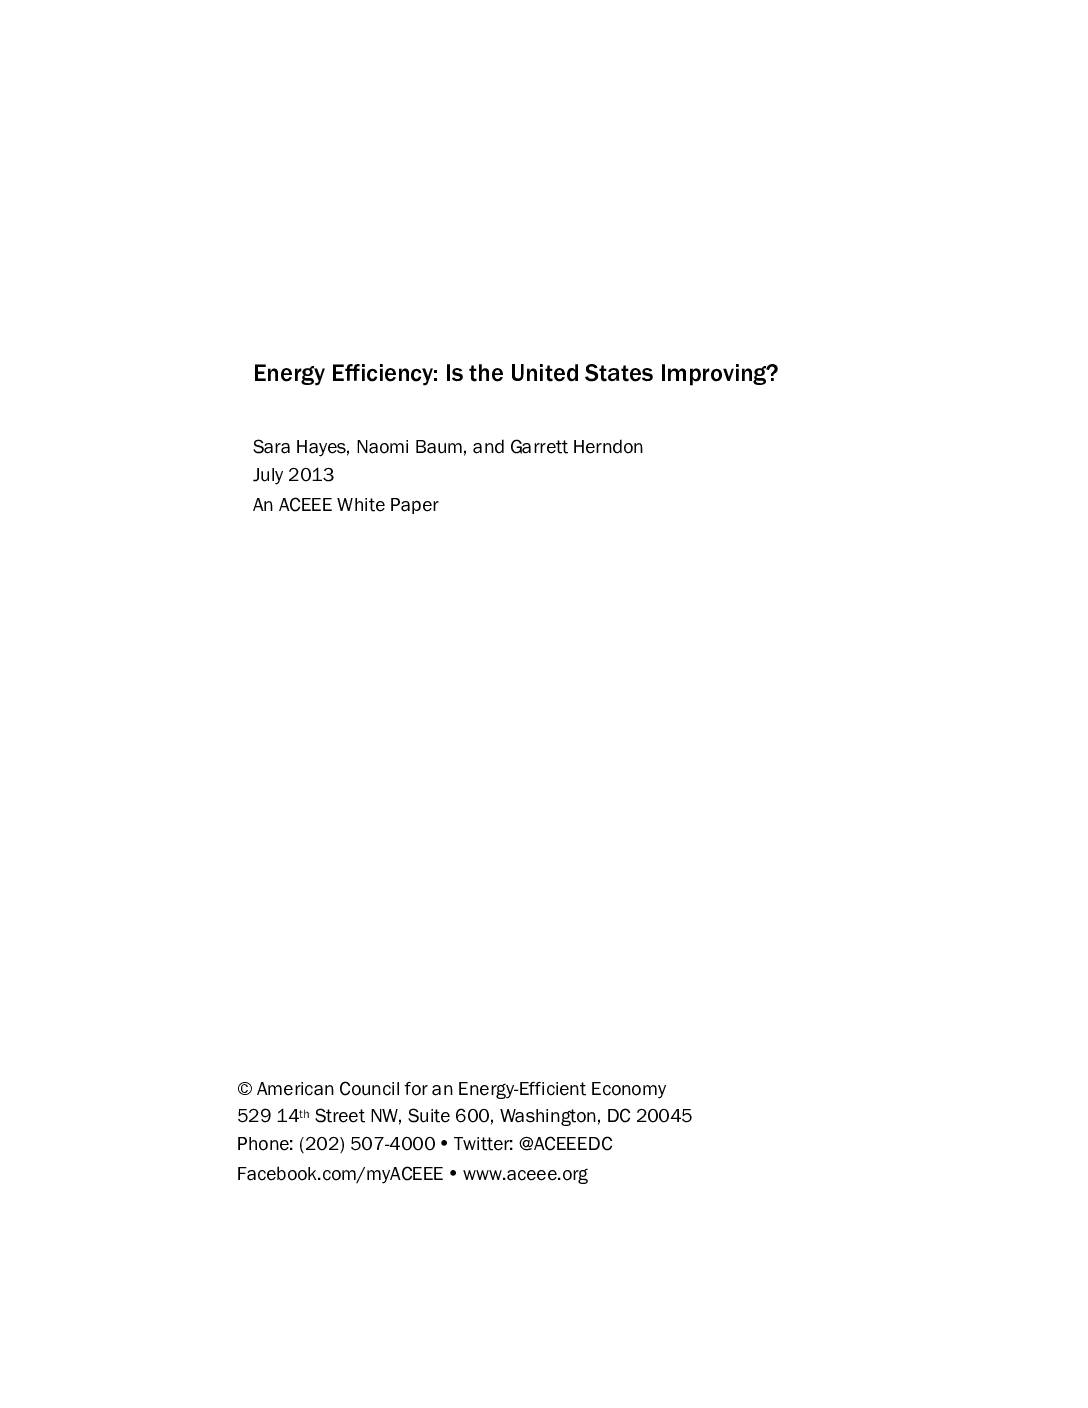 Energy Efficiency: Is the United States Improving?